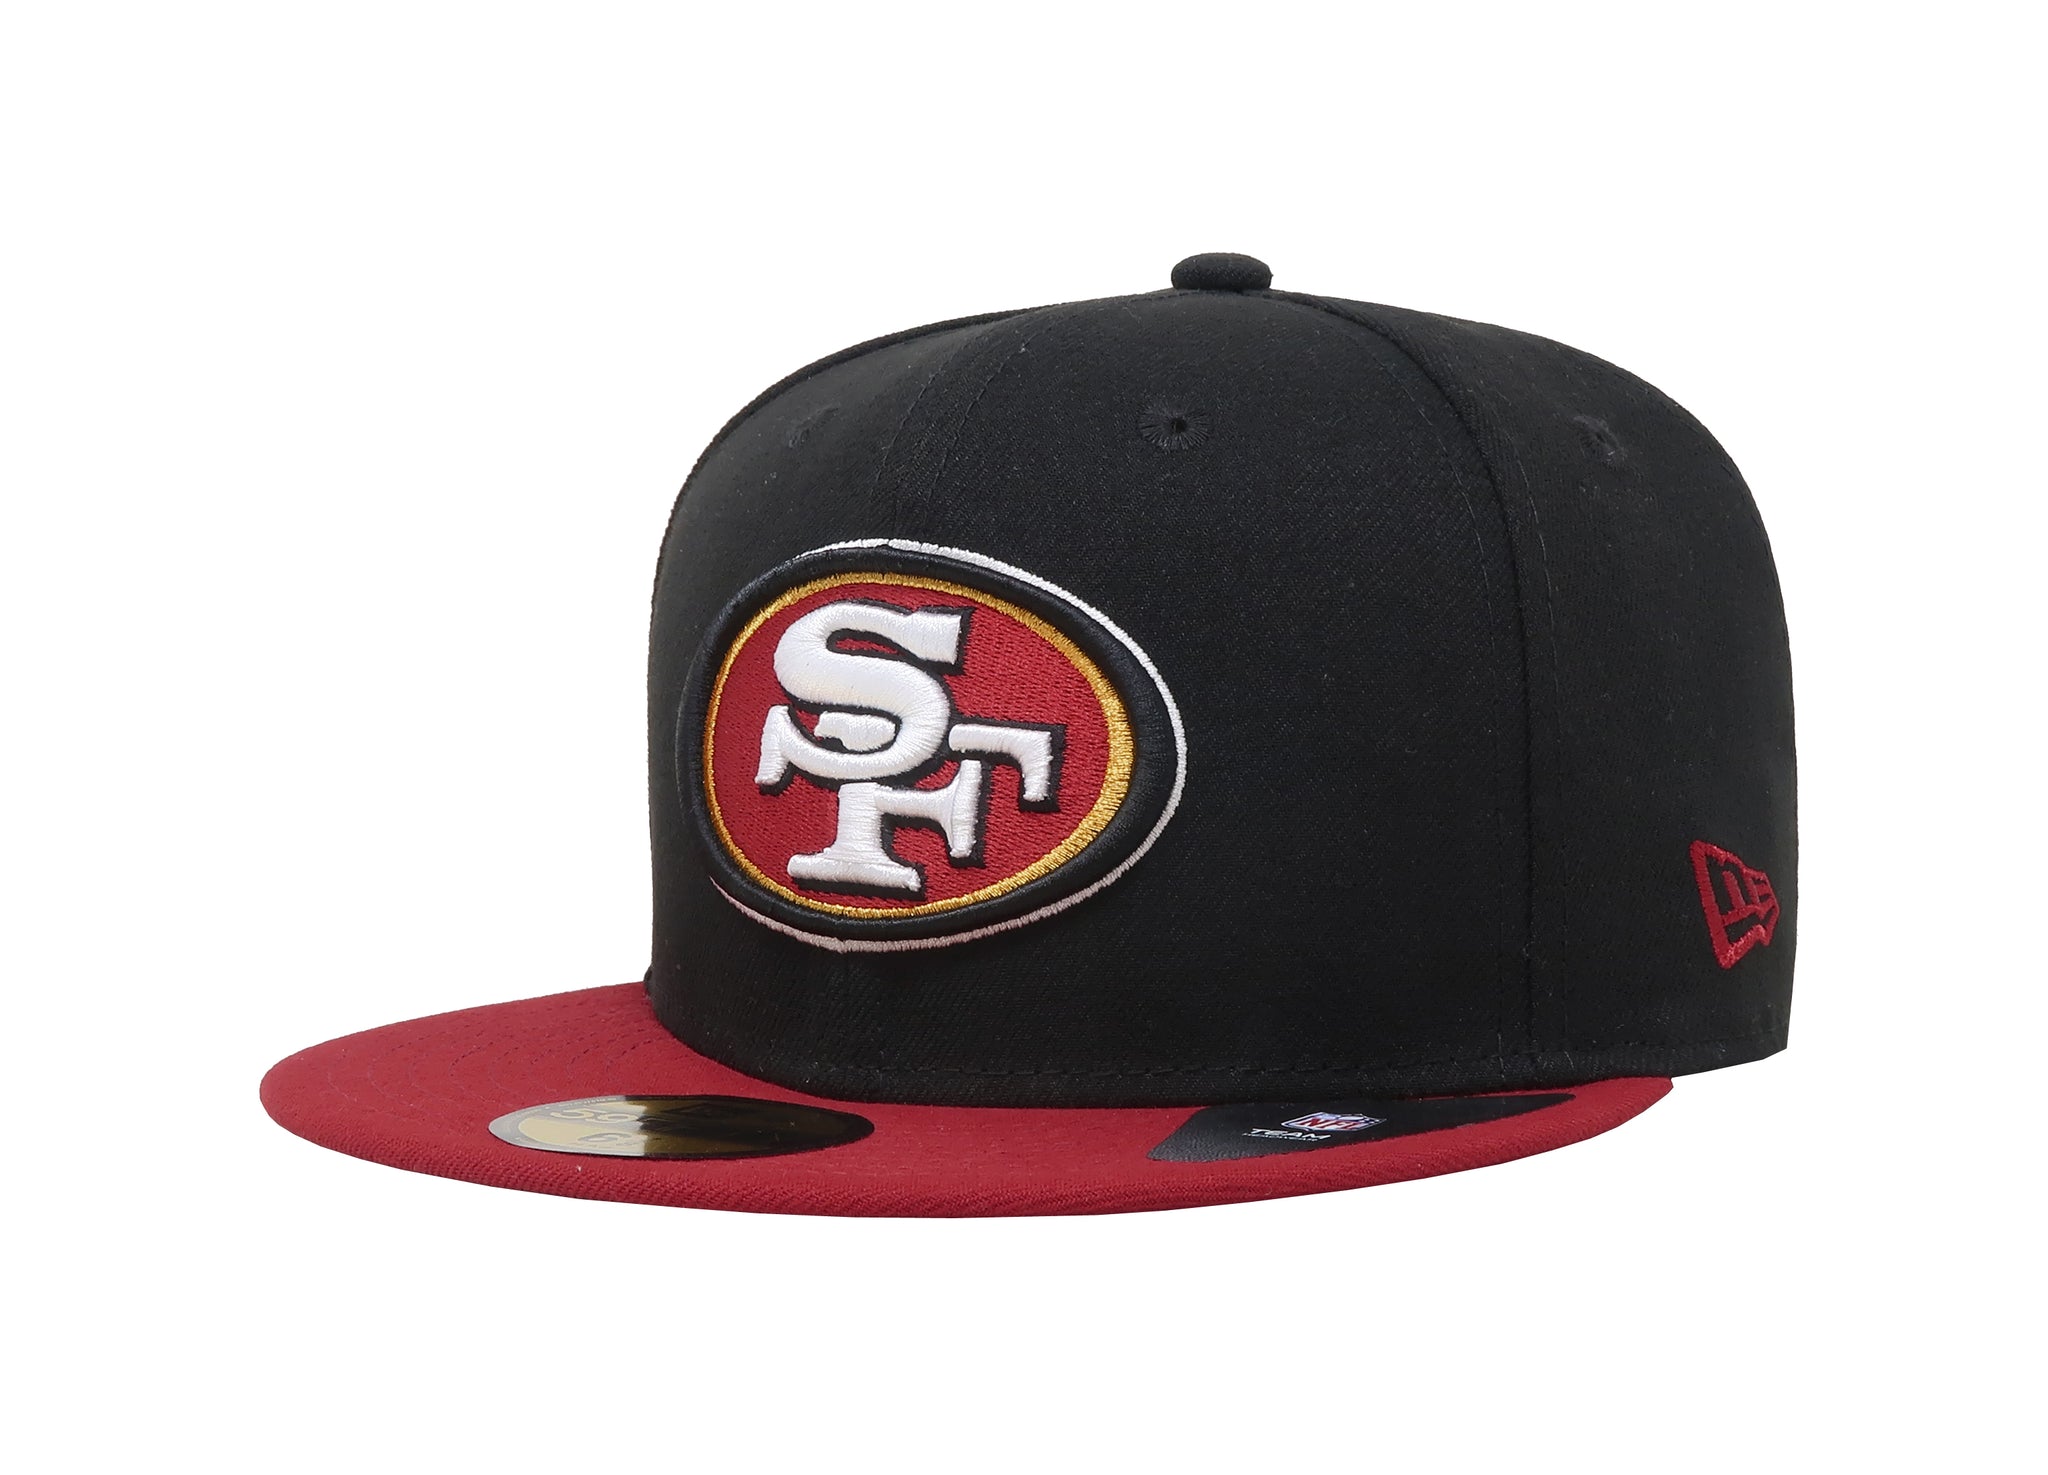 New Era 59Fifty Men's San Francisco 49ers Black/Red Fitted Cap